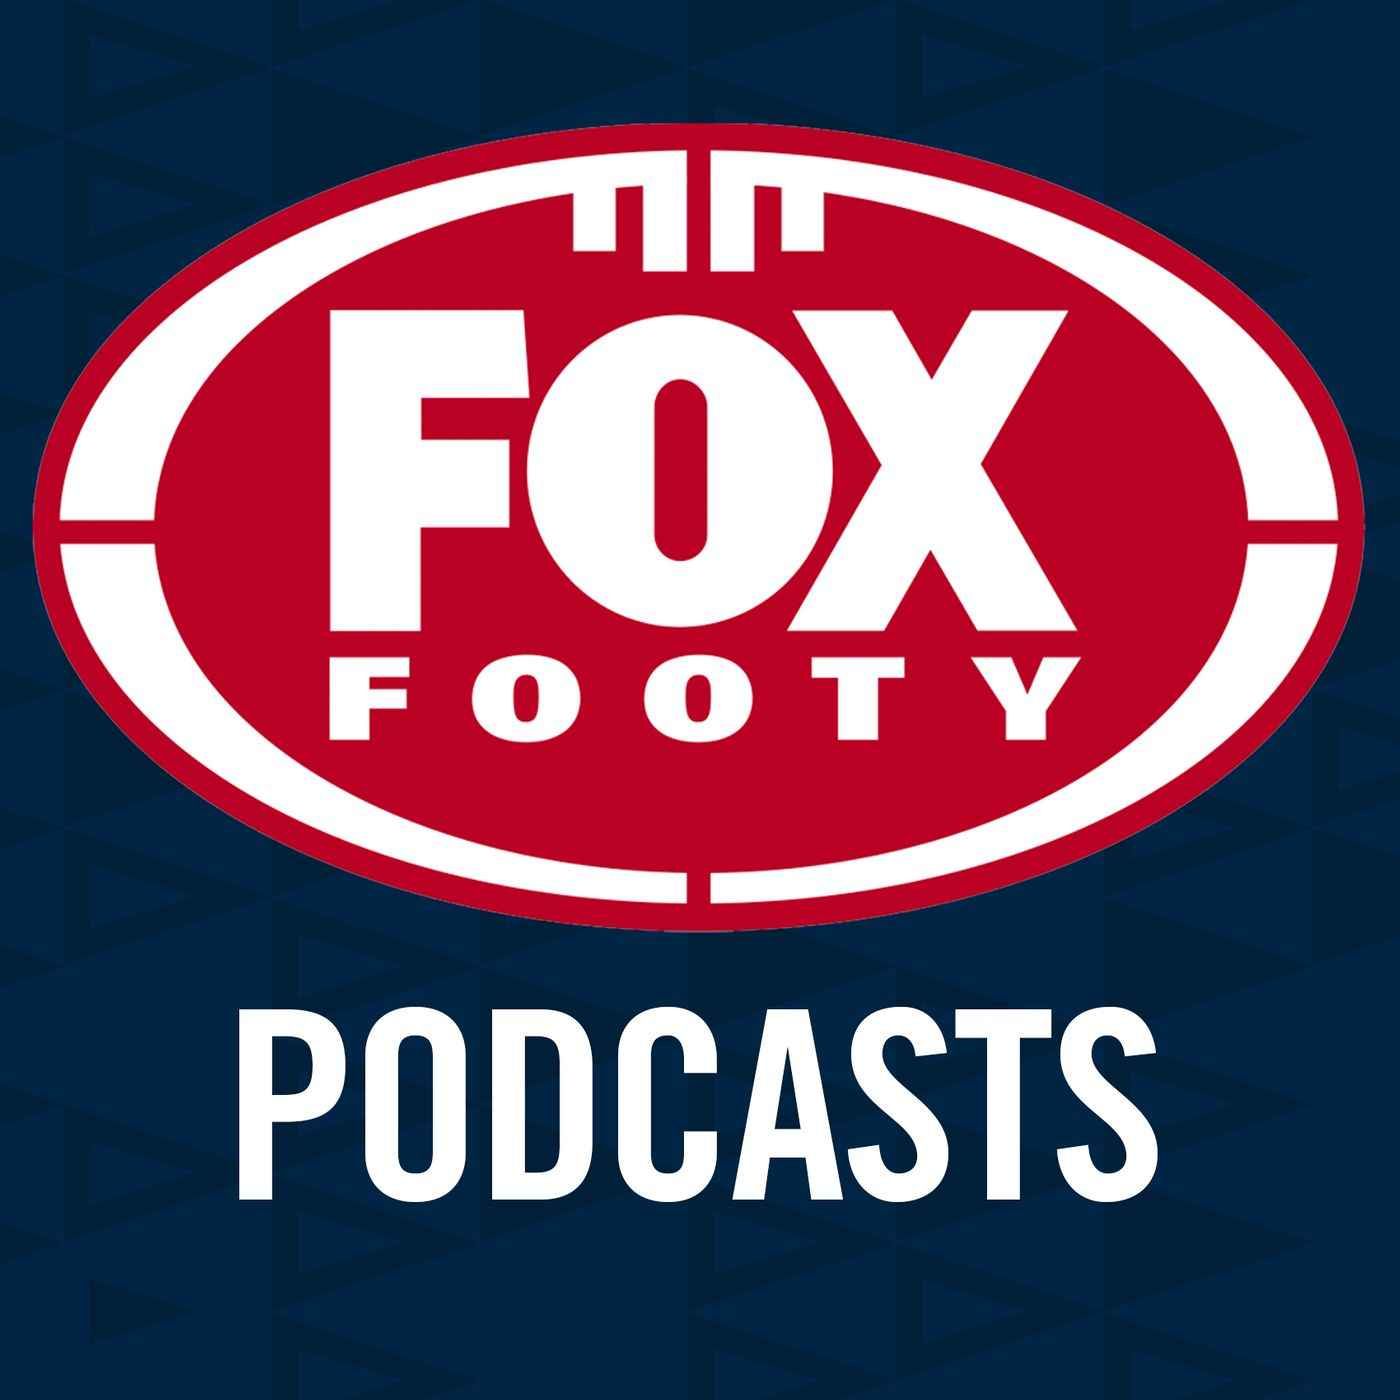 Fox Footy Podcast: Run Home analysed, time to drop a captain?